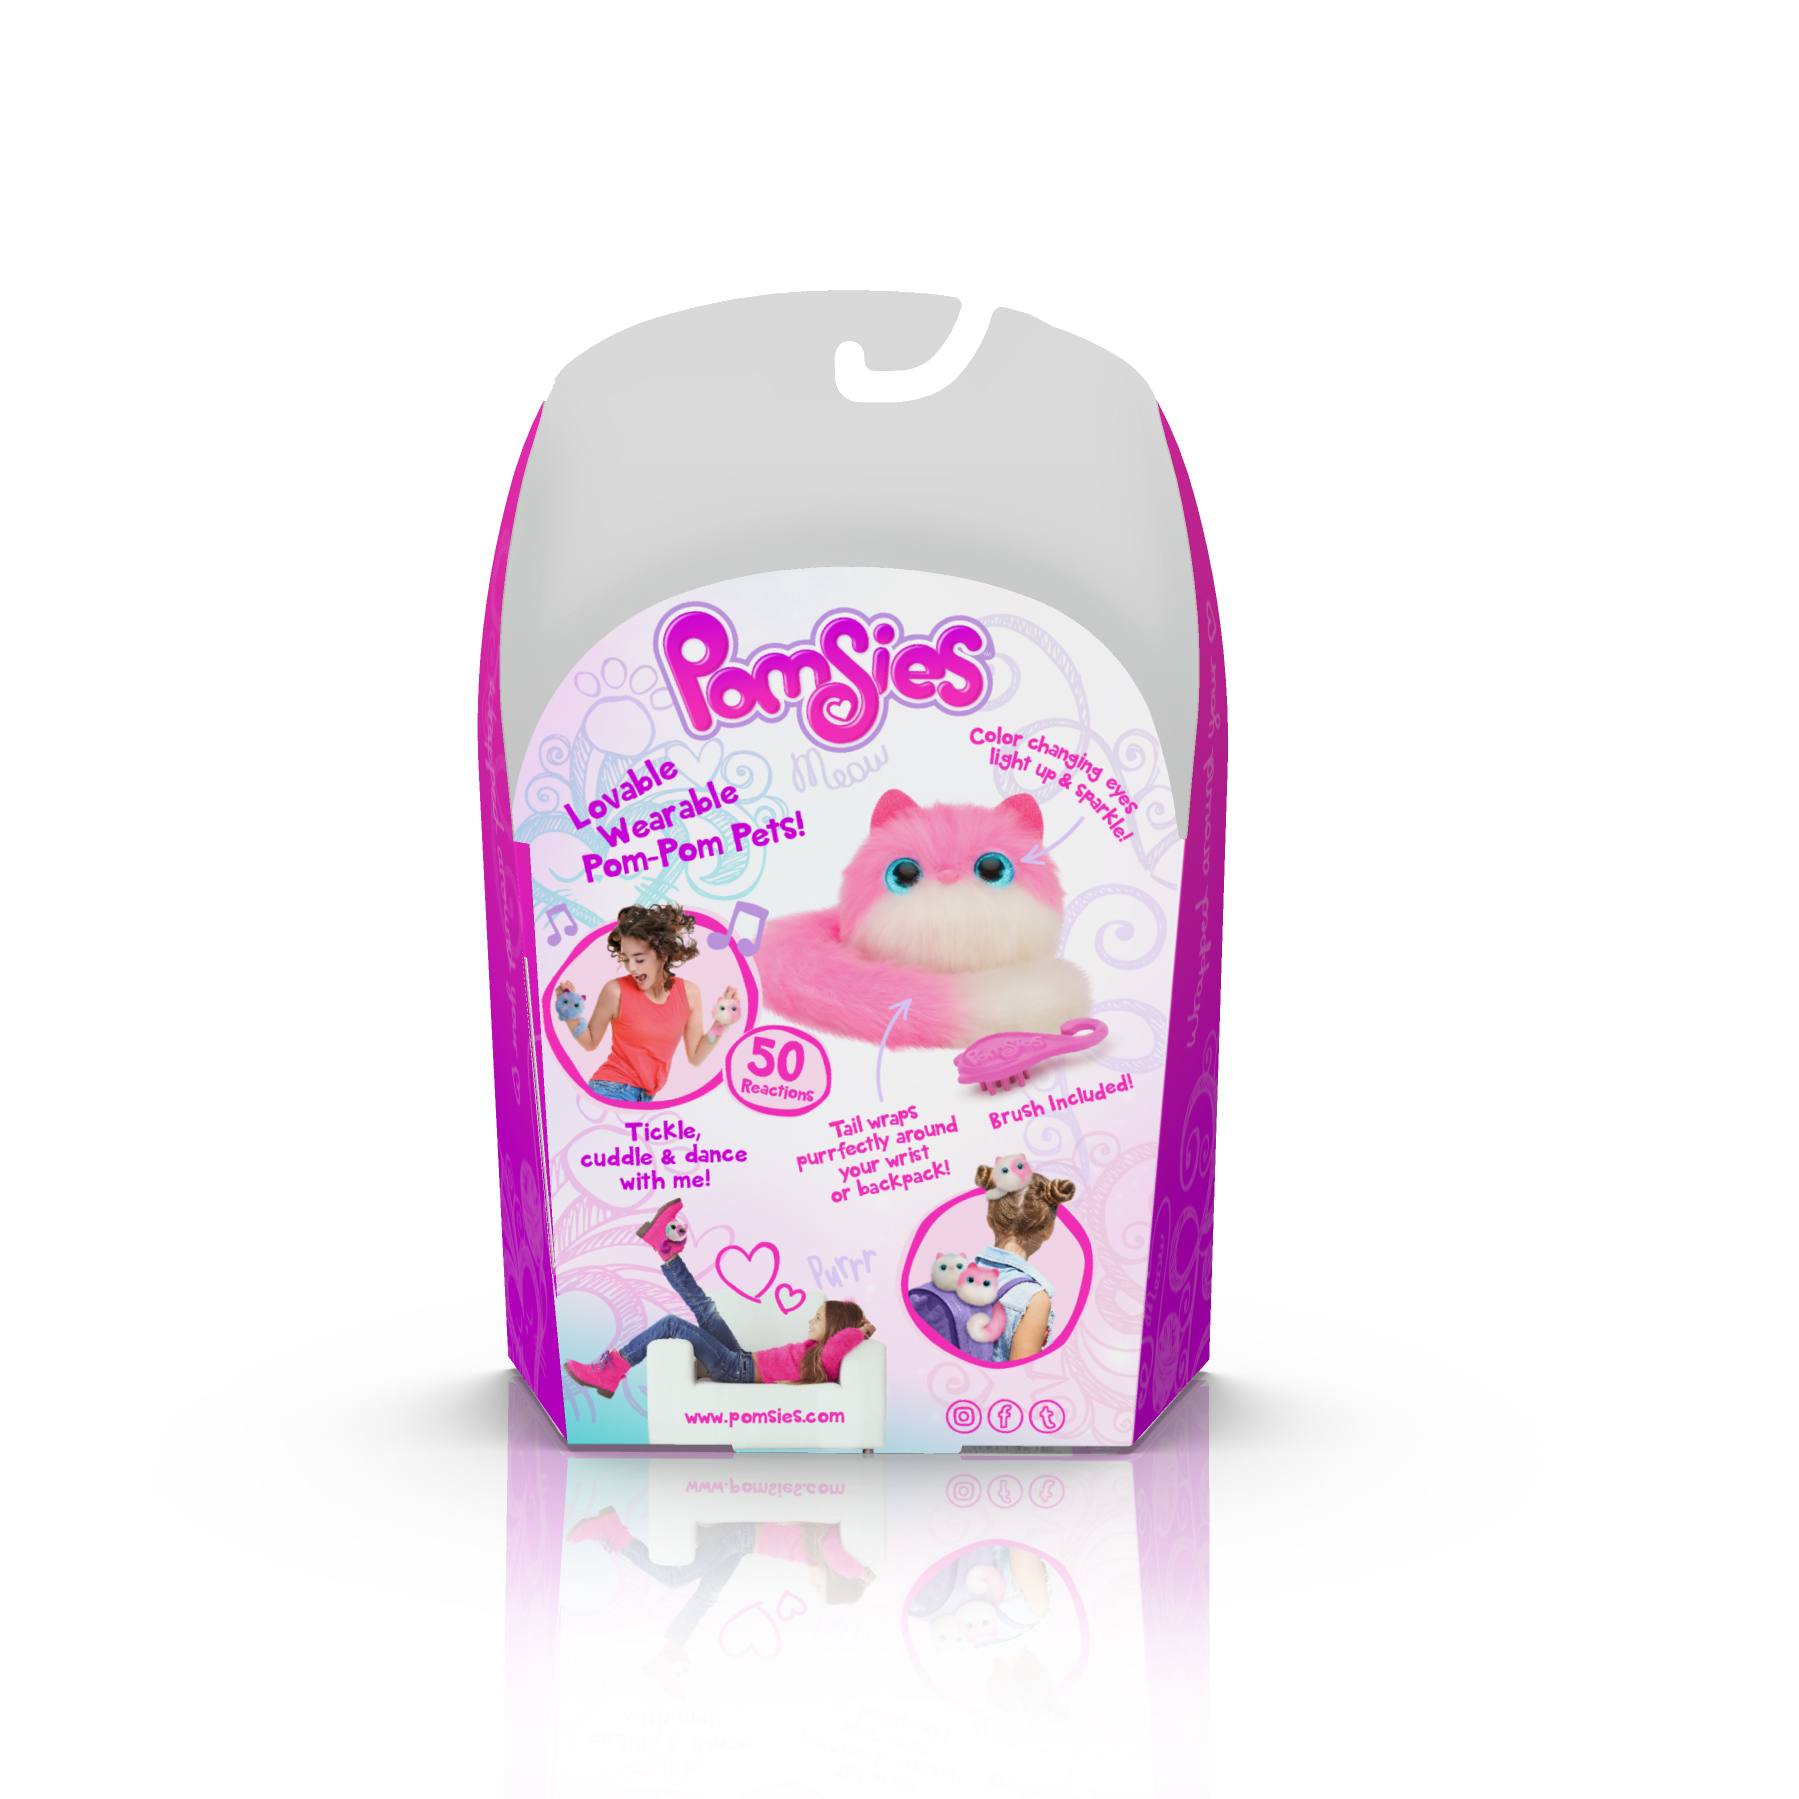 Pomsies Pet Pinky- Plush Interactive Toy - image 3 of 4